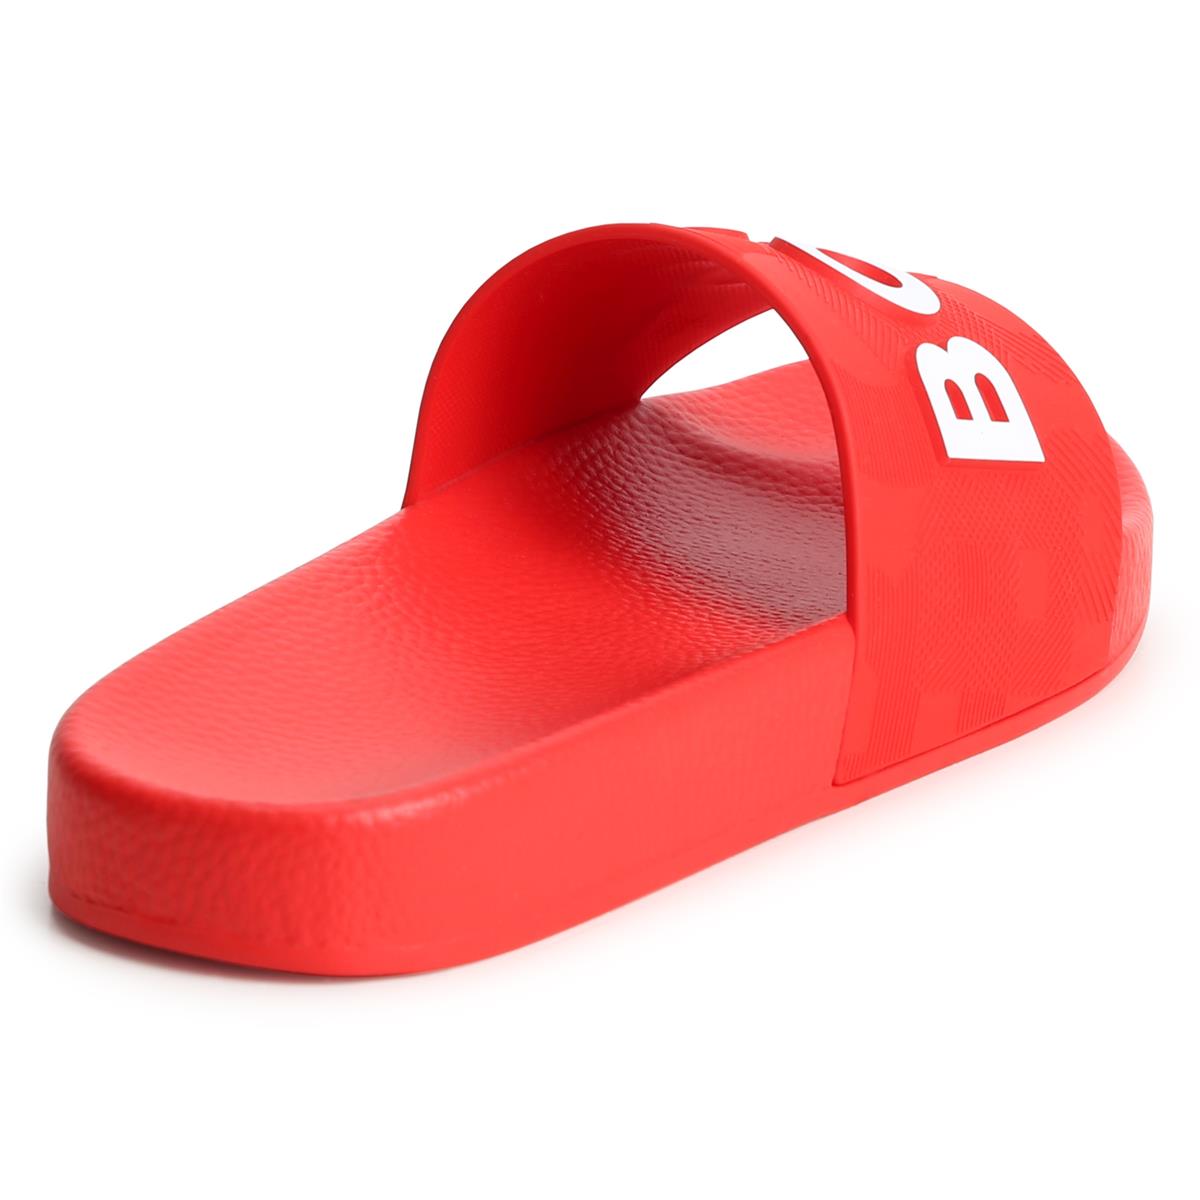 Boys Red Slippers